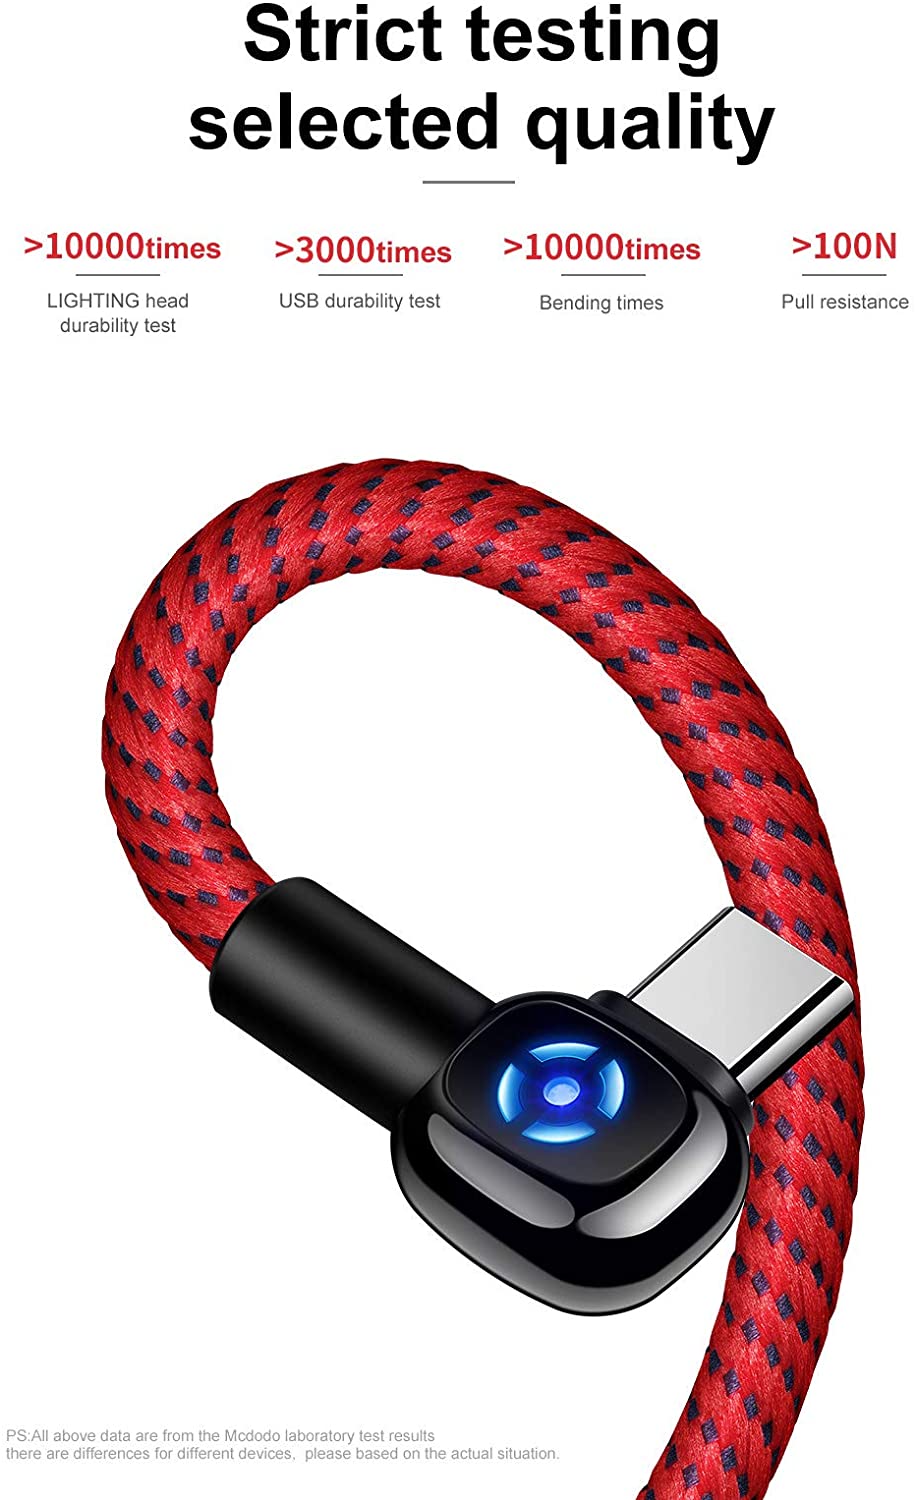 TYPE C Power Off/On Smart LED Auto Disconnect, Mcdodo 90 Degree Right Angle Game Nylon Braided Sync Charge USB Data 5FT/1.5M Cable Compatible Samsung Galaxy/LG/HTC More (Type C Red, 5FT/1.5M)